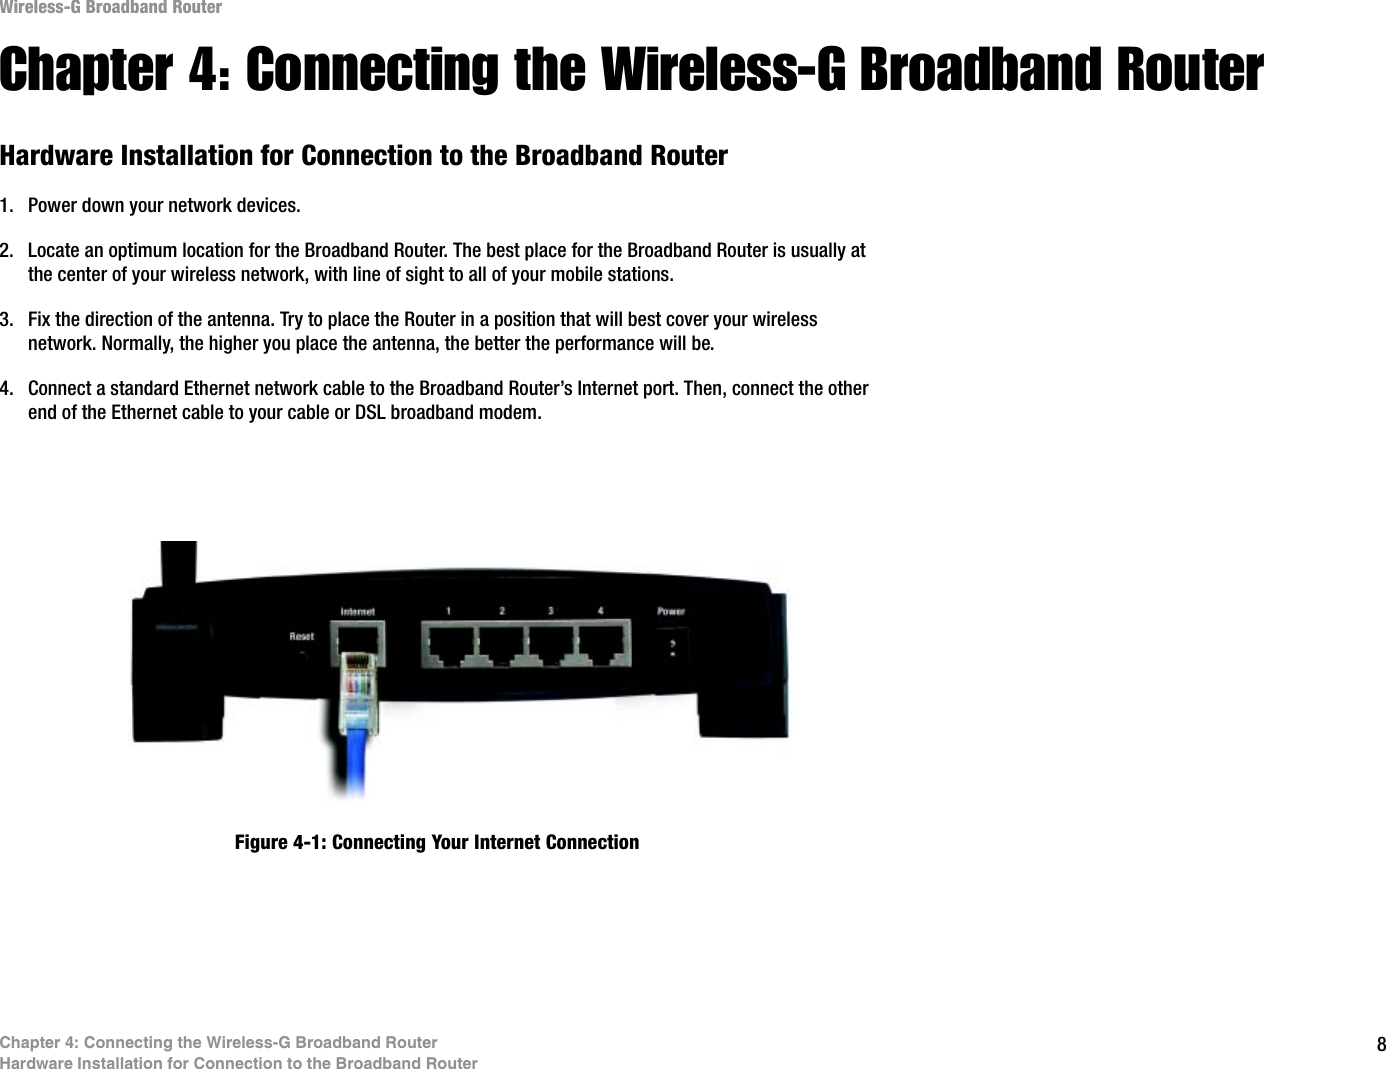 8Chapter 4: Connecting the Wireless-G Broadband RouterHardware Installation for Connection to the Broadband RouterWireless-G Broadband RouterChapter 4: Connecting the Wireless-G Broadband RouterHardware Installation for Connection to the Broadband Router1. Power down your network devices.2. Locate an optimum location for the Broadband Router. The best place for the Broadband Router is usually at the center of your wireless network, with line of sight to all of your mobile stations.3. Fix the direction of the antenna. Try to place the Router in a position that will best cover your wireless network. Normally, the higher you place the antenna, the better the performance will be.4. Connect a standard Ethernet network cable to the Broadband Router’s Internet port. Then, connect the other end of the Ethernet cable to your cable or DSL broadband modem.Figure 4-1: Connecting Your Internet Connection